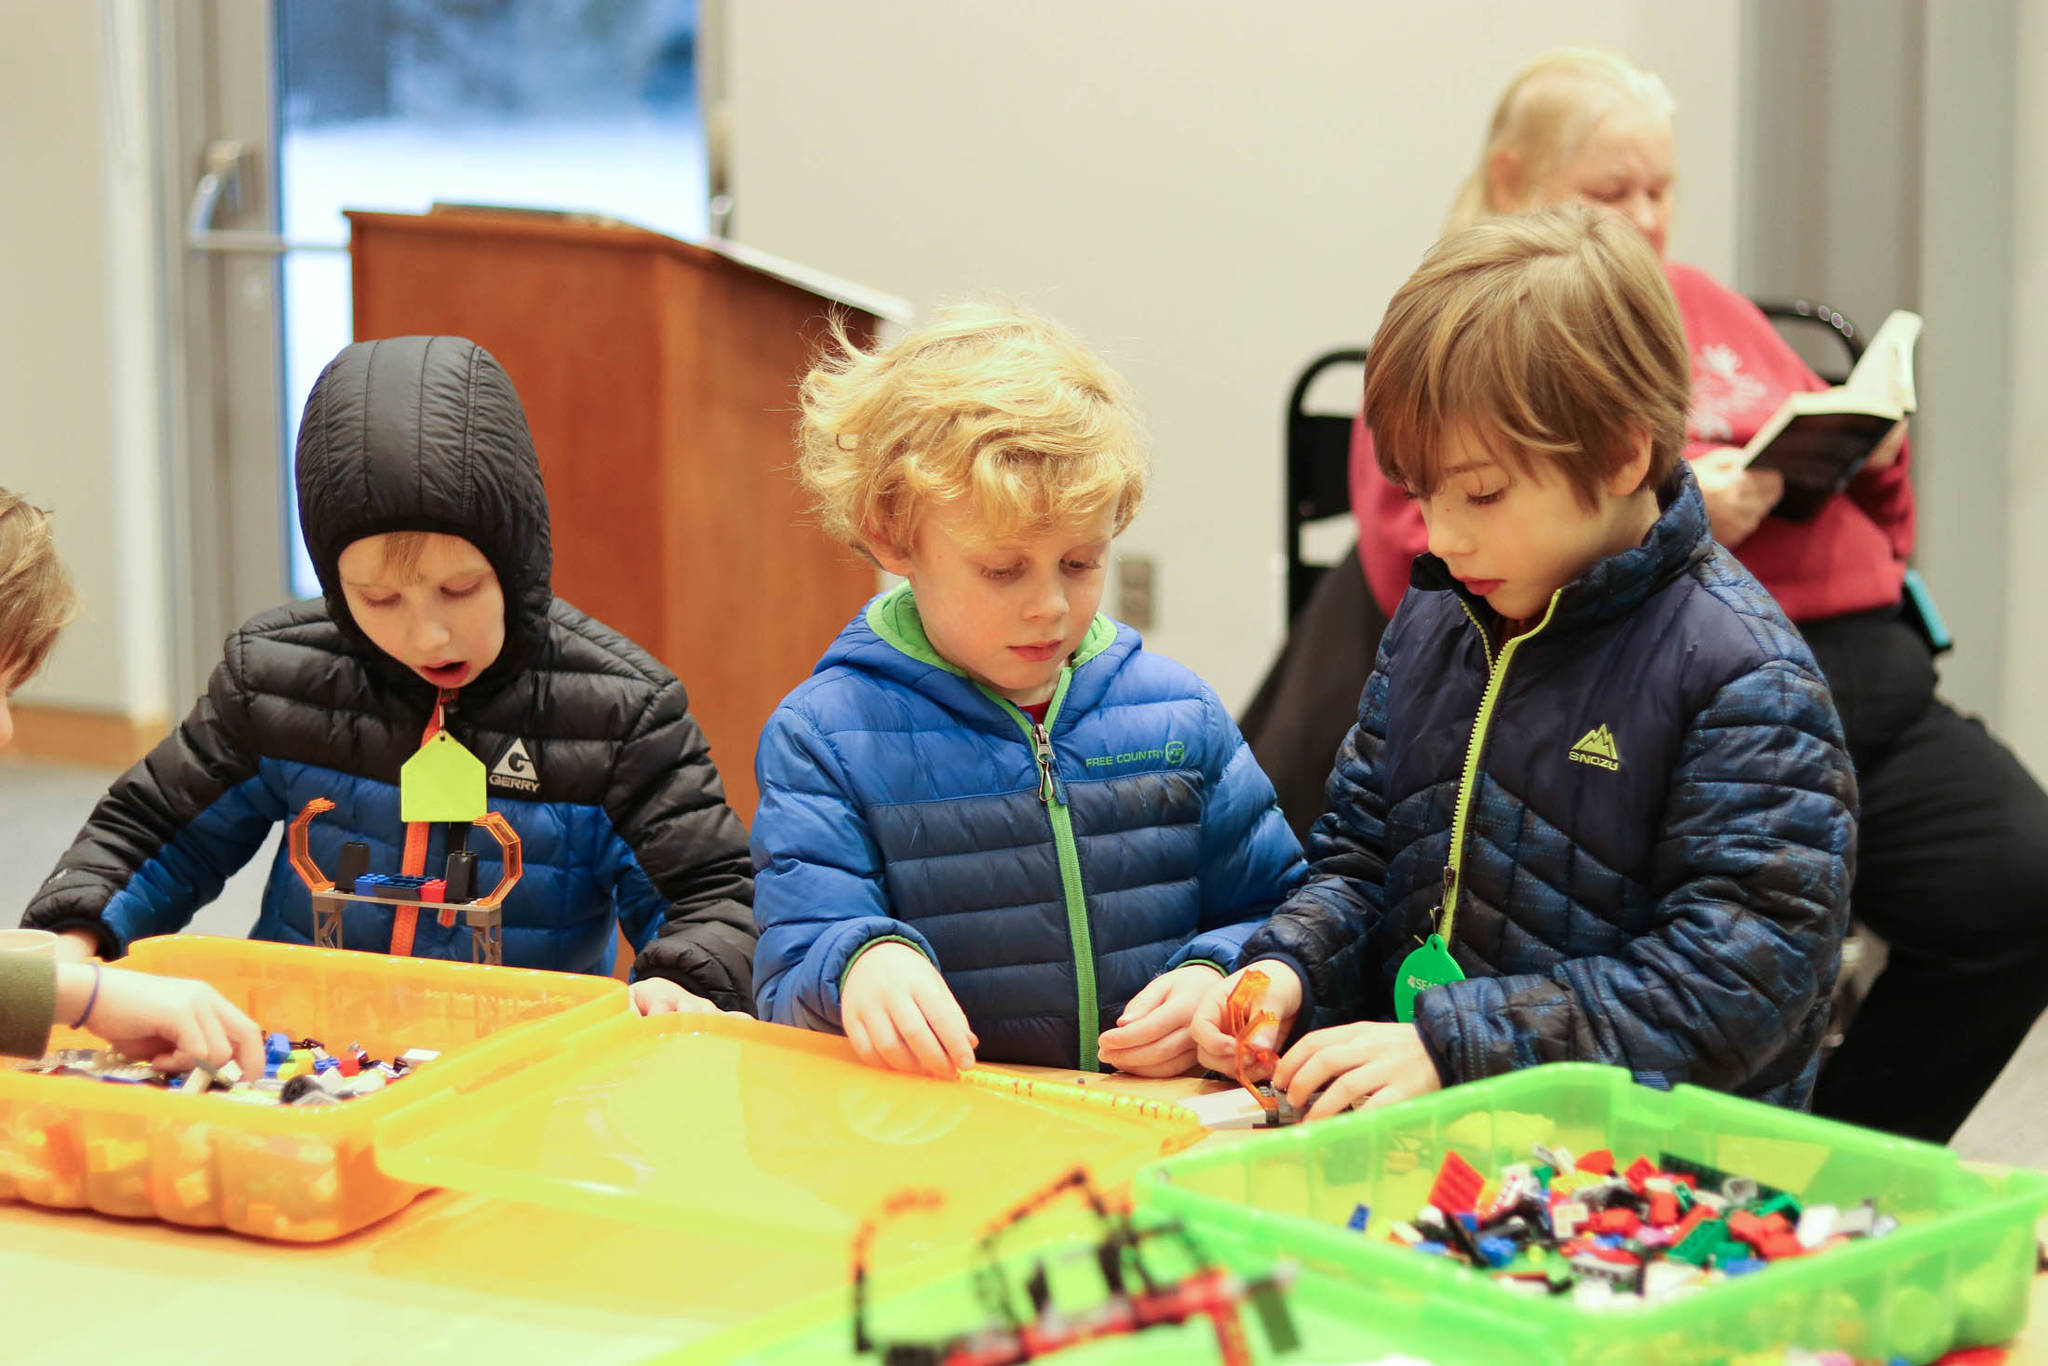 The LEGO building challenge helped kick off the opening of the “Discover Tech: Engineers Make a World of Difference” interactive exhibit which will be at the Mendenhall Library until April 6. Photos by Erin Laughlin | For the Capital City Weekly